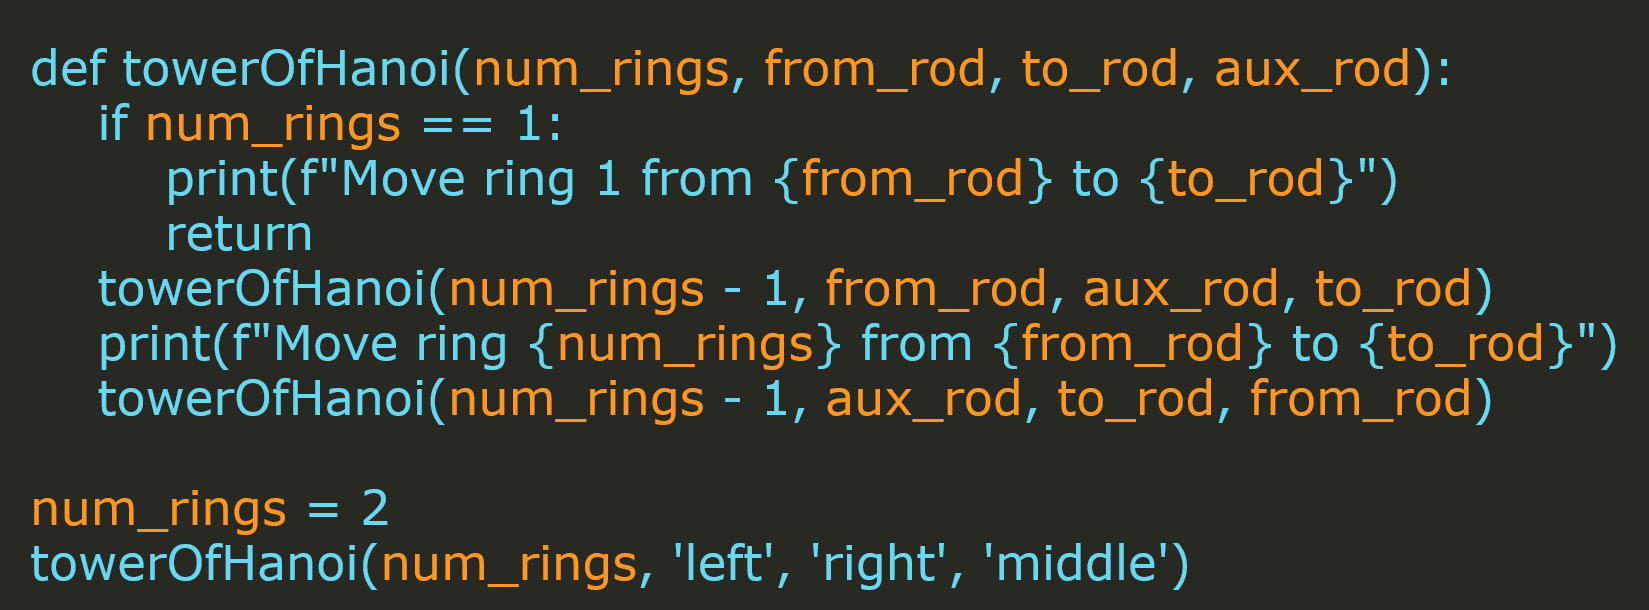 In this example, we use our pattern highlighter to add coloring to a Python code snippet that solves the Tower of Hanoi problem. We use a color palette similar to the one in our text editor and display the function arguments and variables in color #fd9622 (DarkOrange) and all remaining syntactic elements in color #6cdbf2 (SkyBlue). The arguments and variables that get colored are "num_rings", "from_rod", "to_rod", and "aux_rod" and the code instantly becomes easier to read.